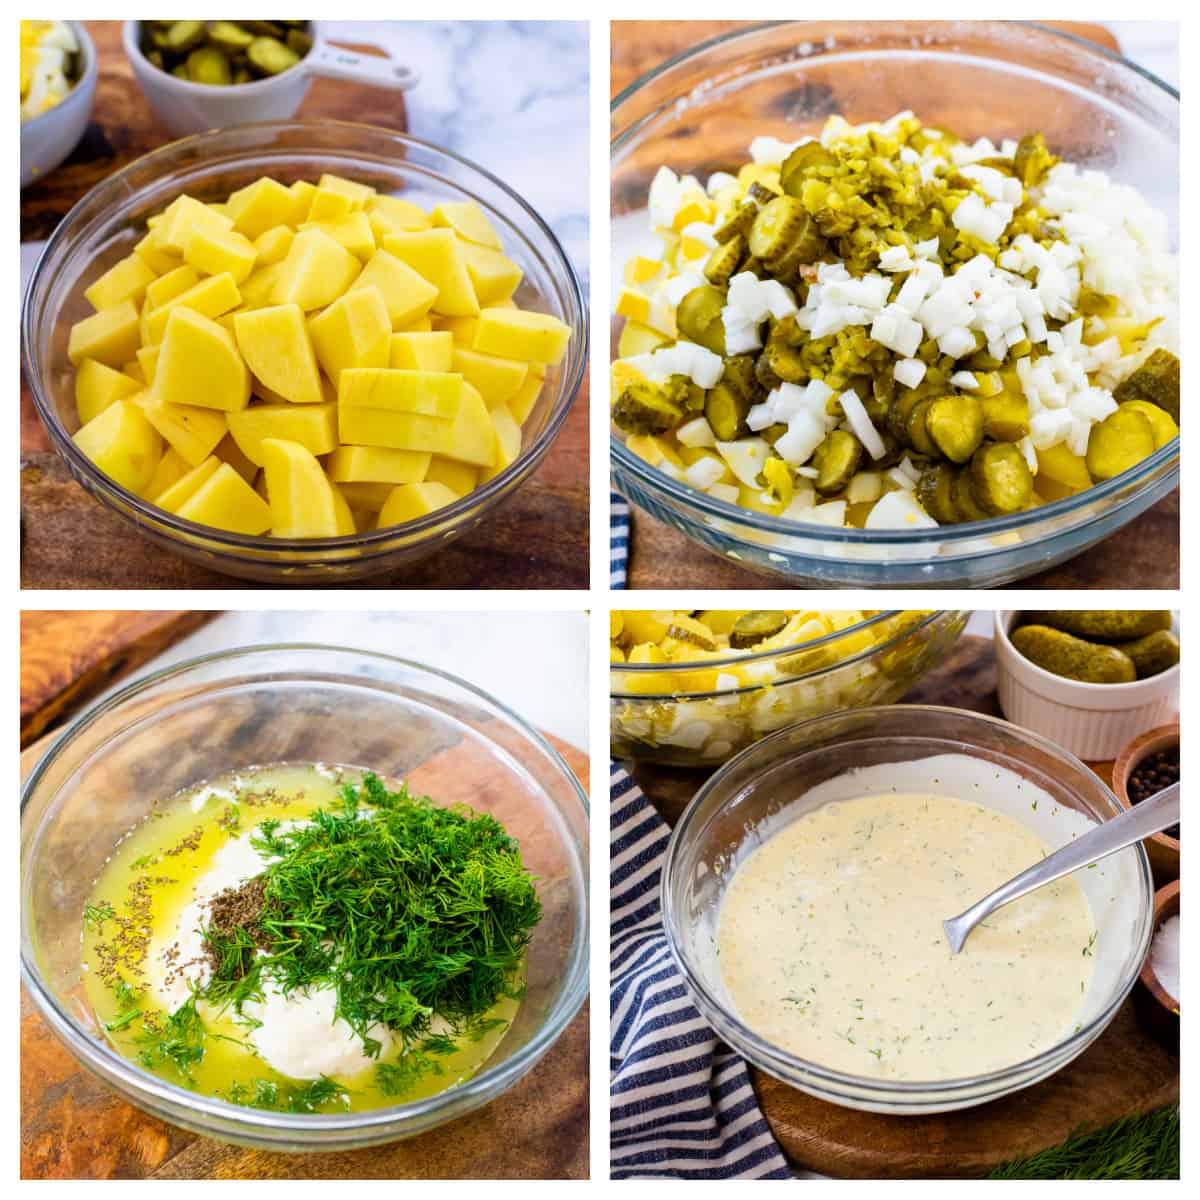 Collage showing how to make dill pickle potato salad.